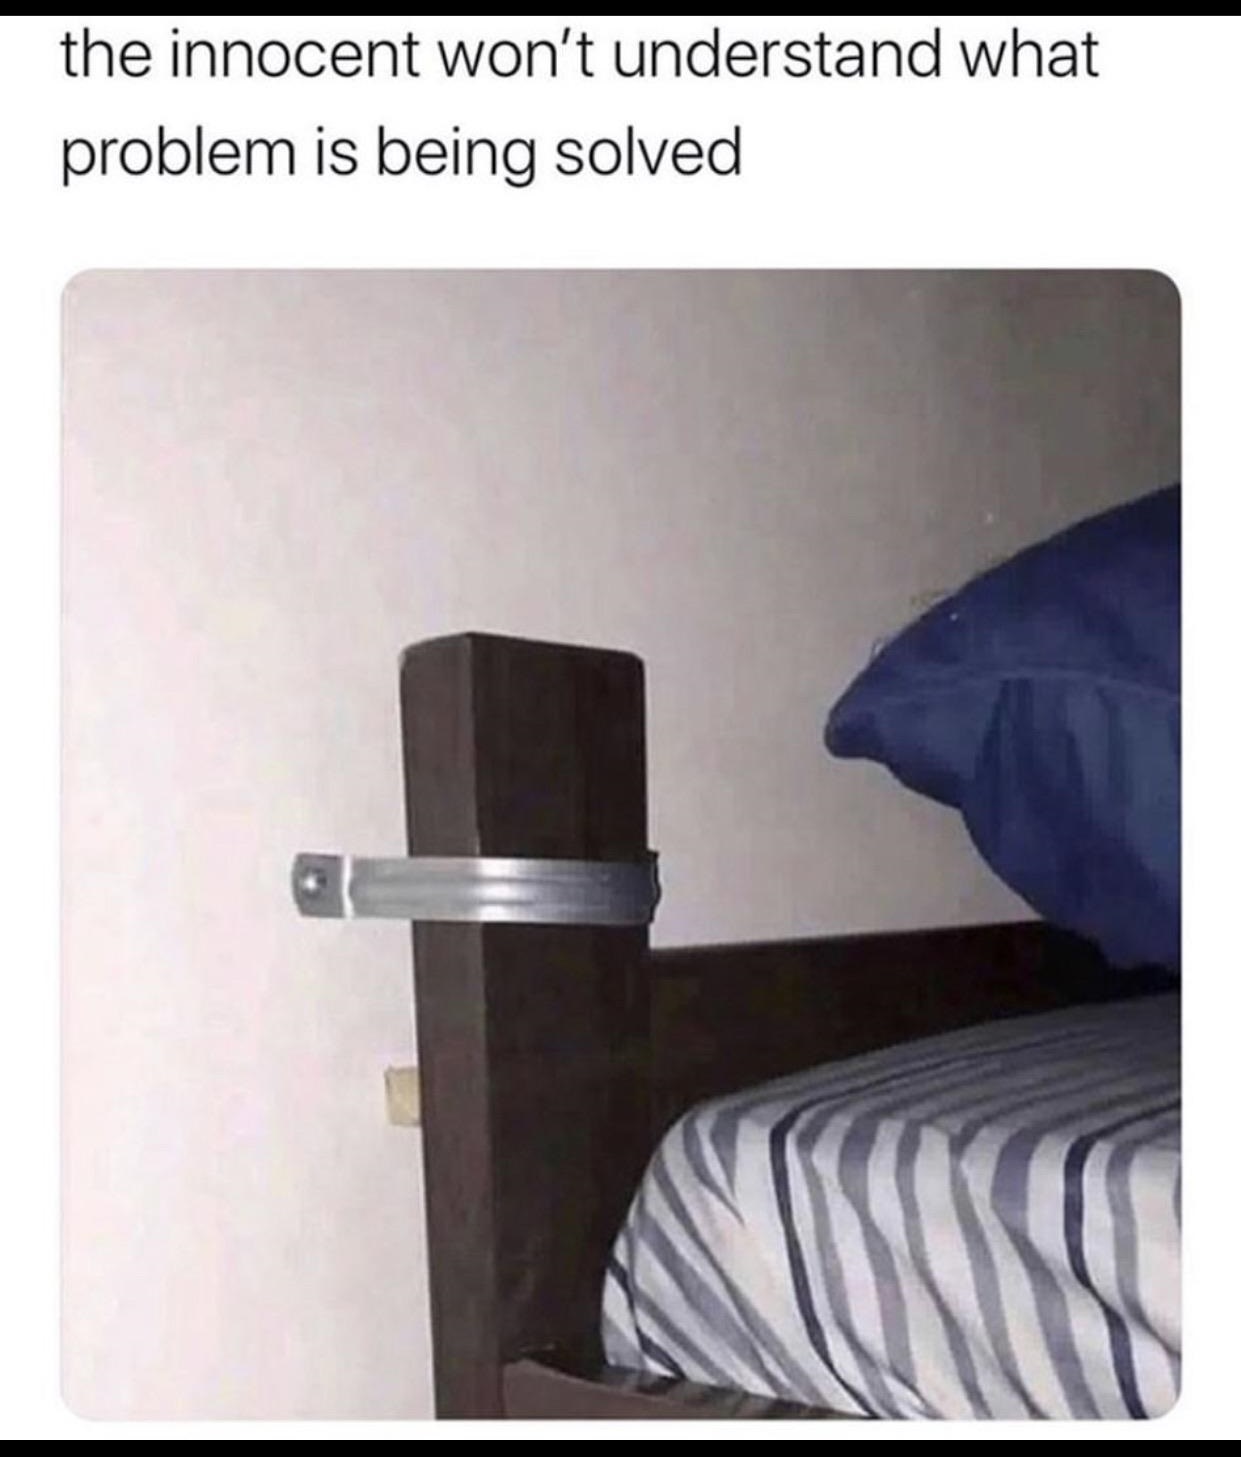 Joke - the innocent won't understand what problem is being solved